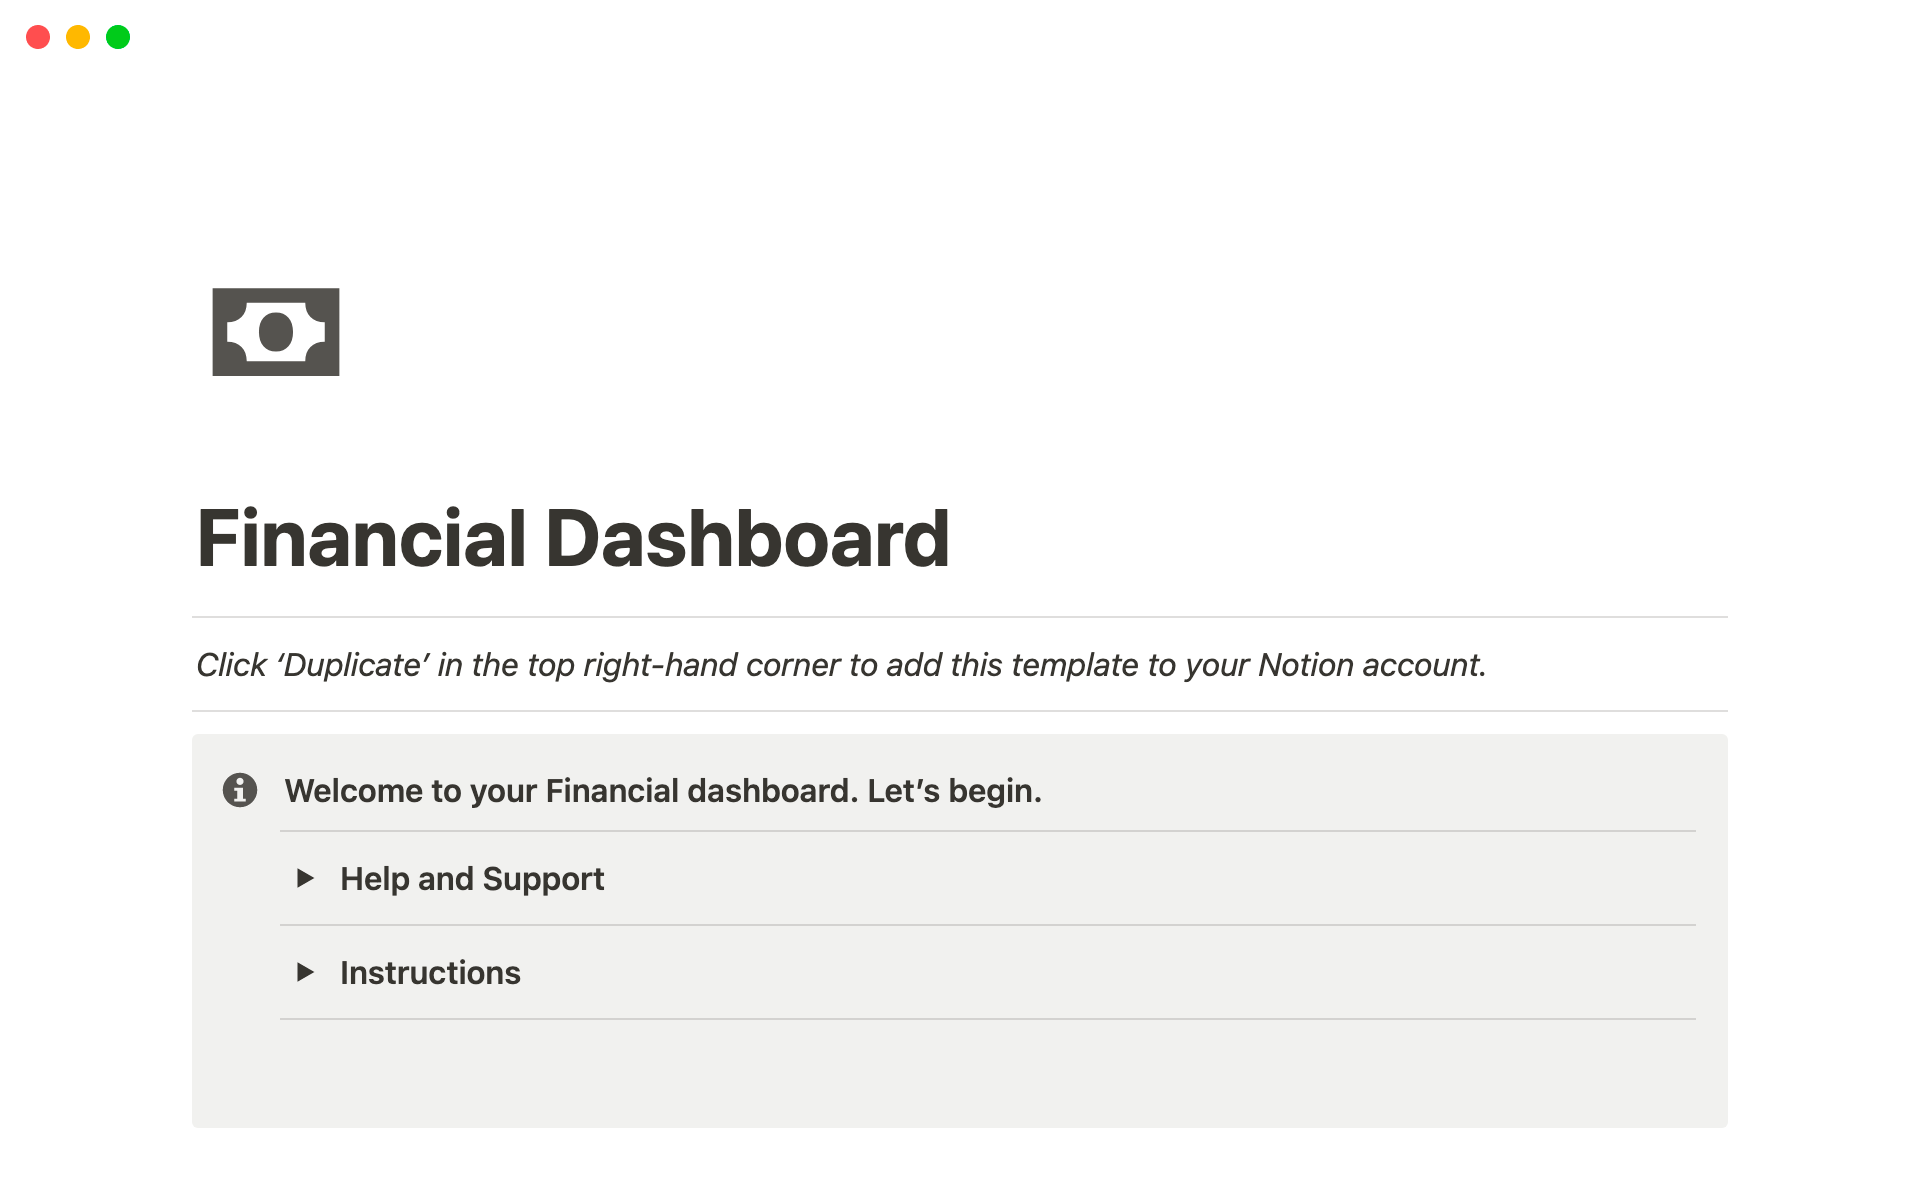 This financial dashboard allows freelancers and service providers manage all of their business finances (and financial activities) in one place.